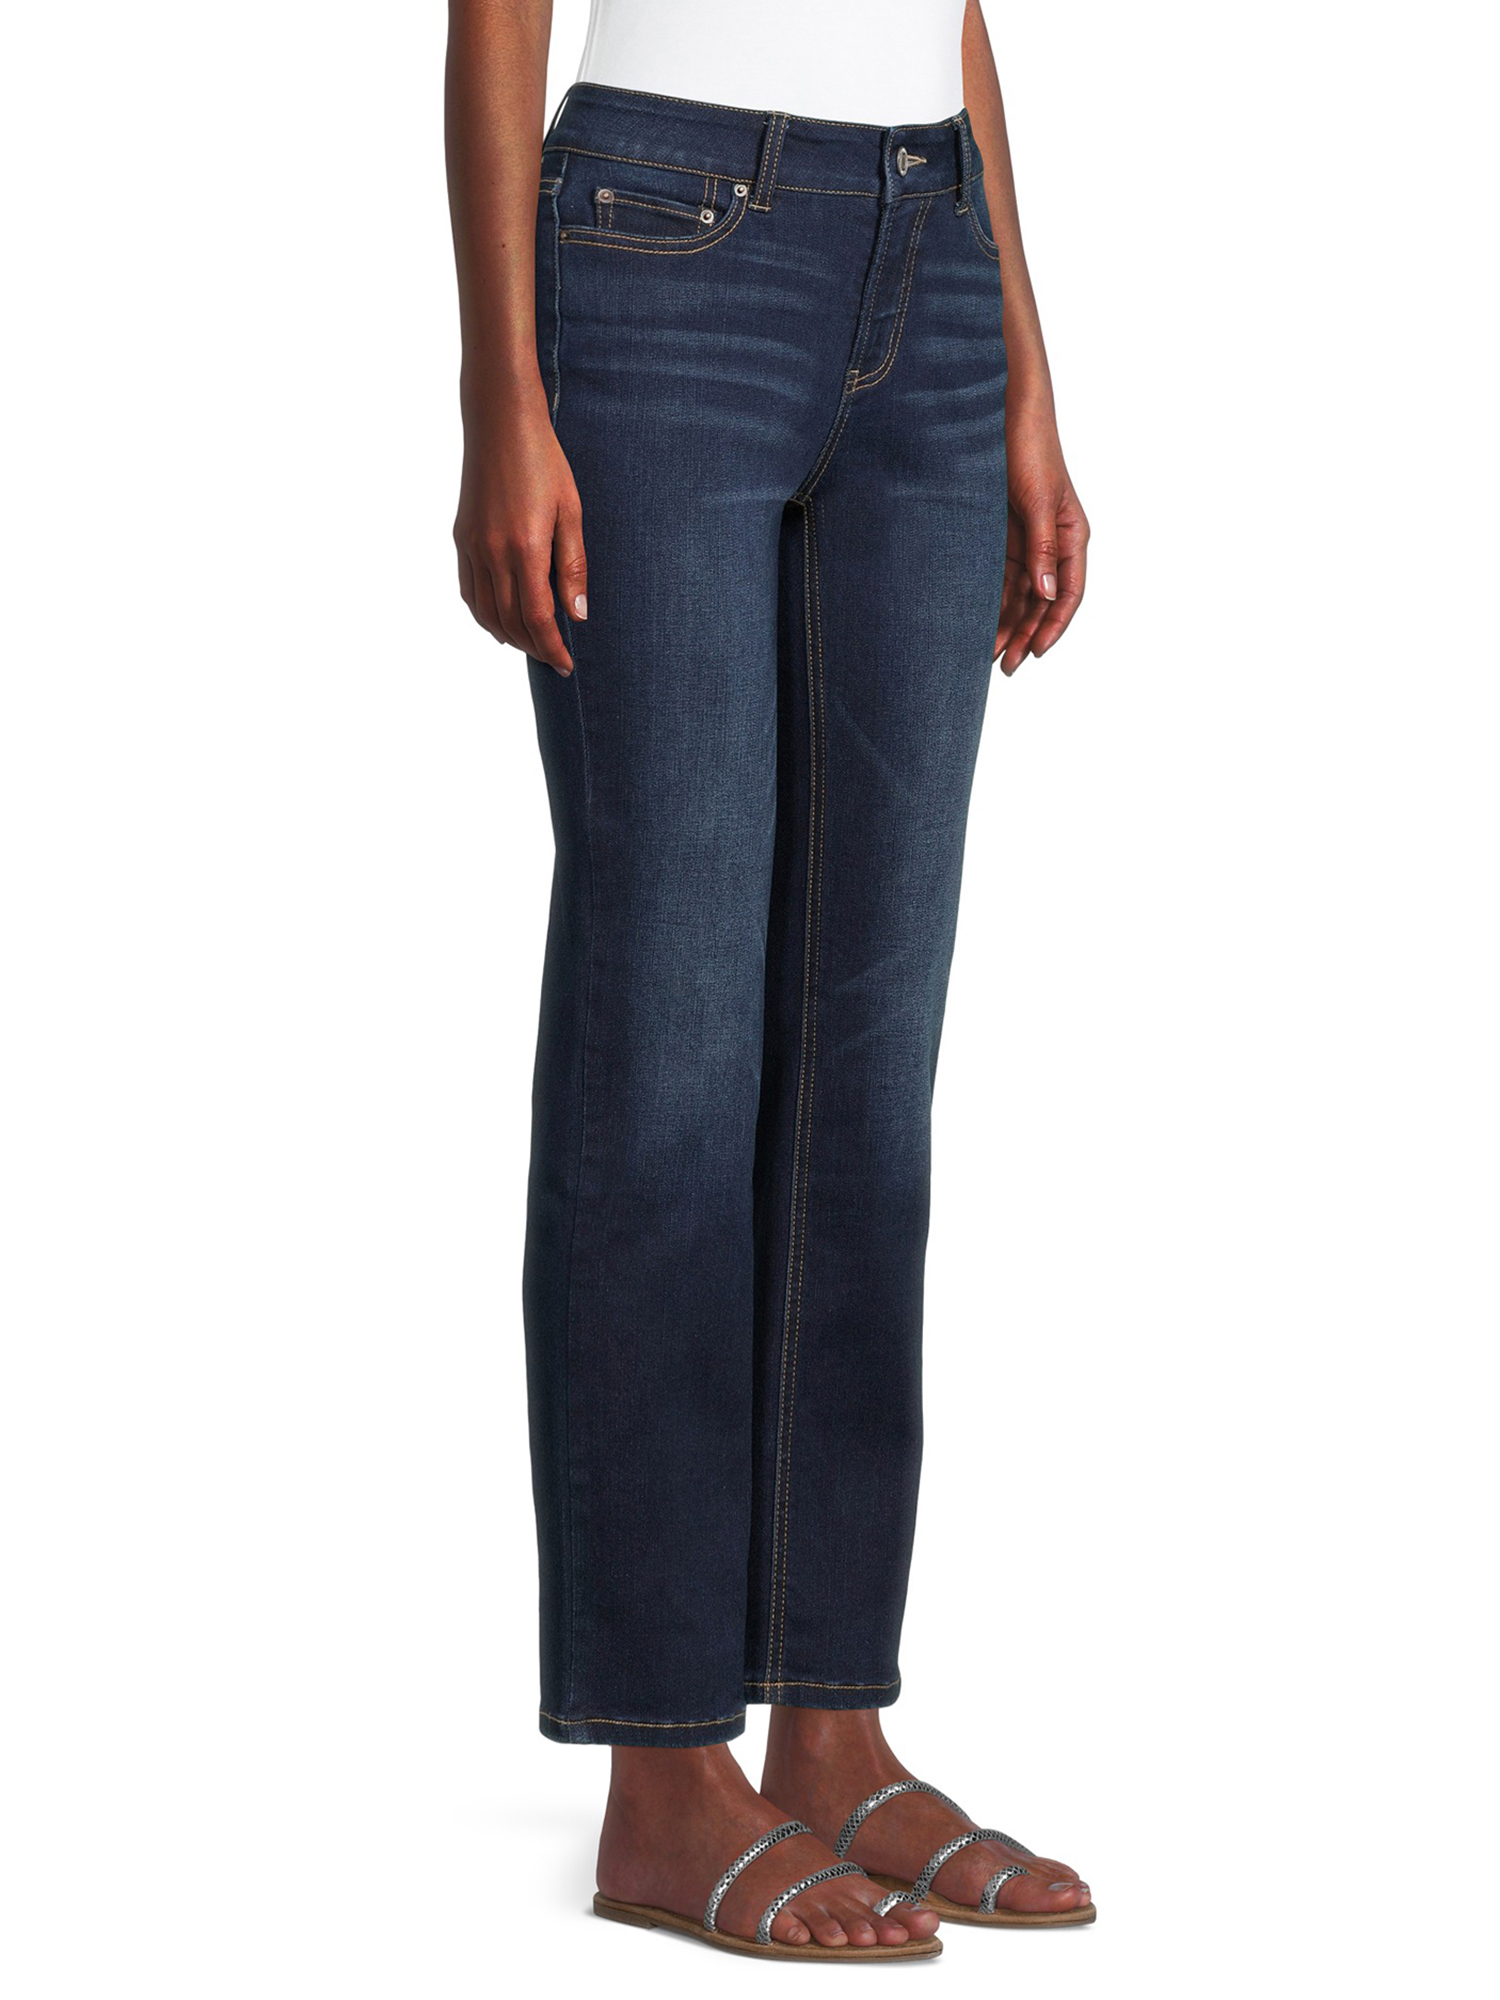 Time and Tru Women’s Mid Rise Straight Jeans, 29" Inseam for Regular, Sizes 2-18 - image 3 of 6